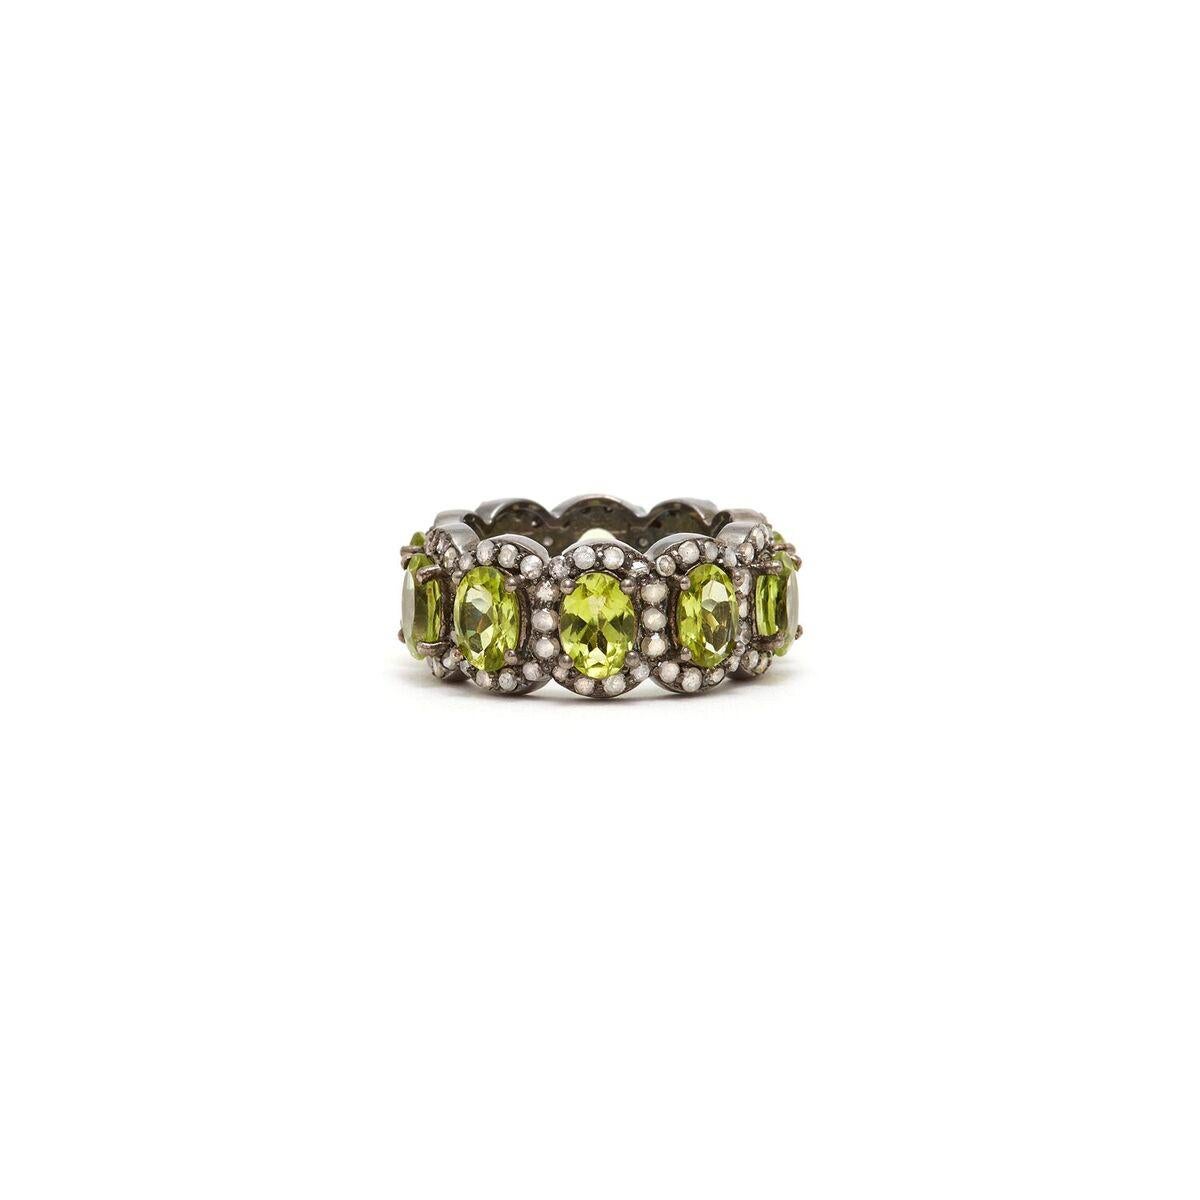 Alluring baguettes of green Peridot accented with white Diamonds in a band of blackened silver reminiscent of an Art Deco Tiara.

- Natural Green Peridot.
- White Diamonds.
- Set in Blackened Oxidized Silver.